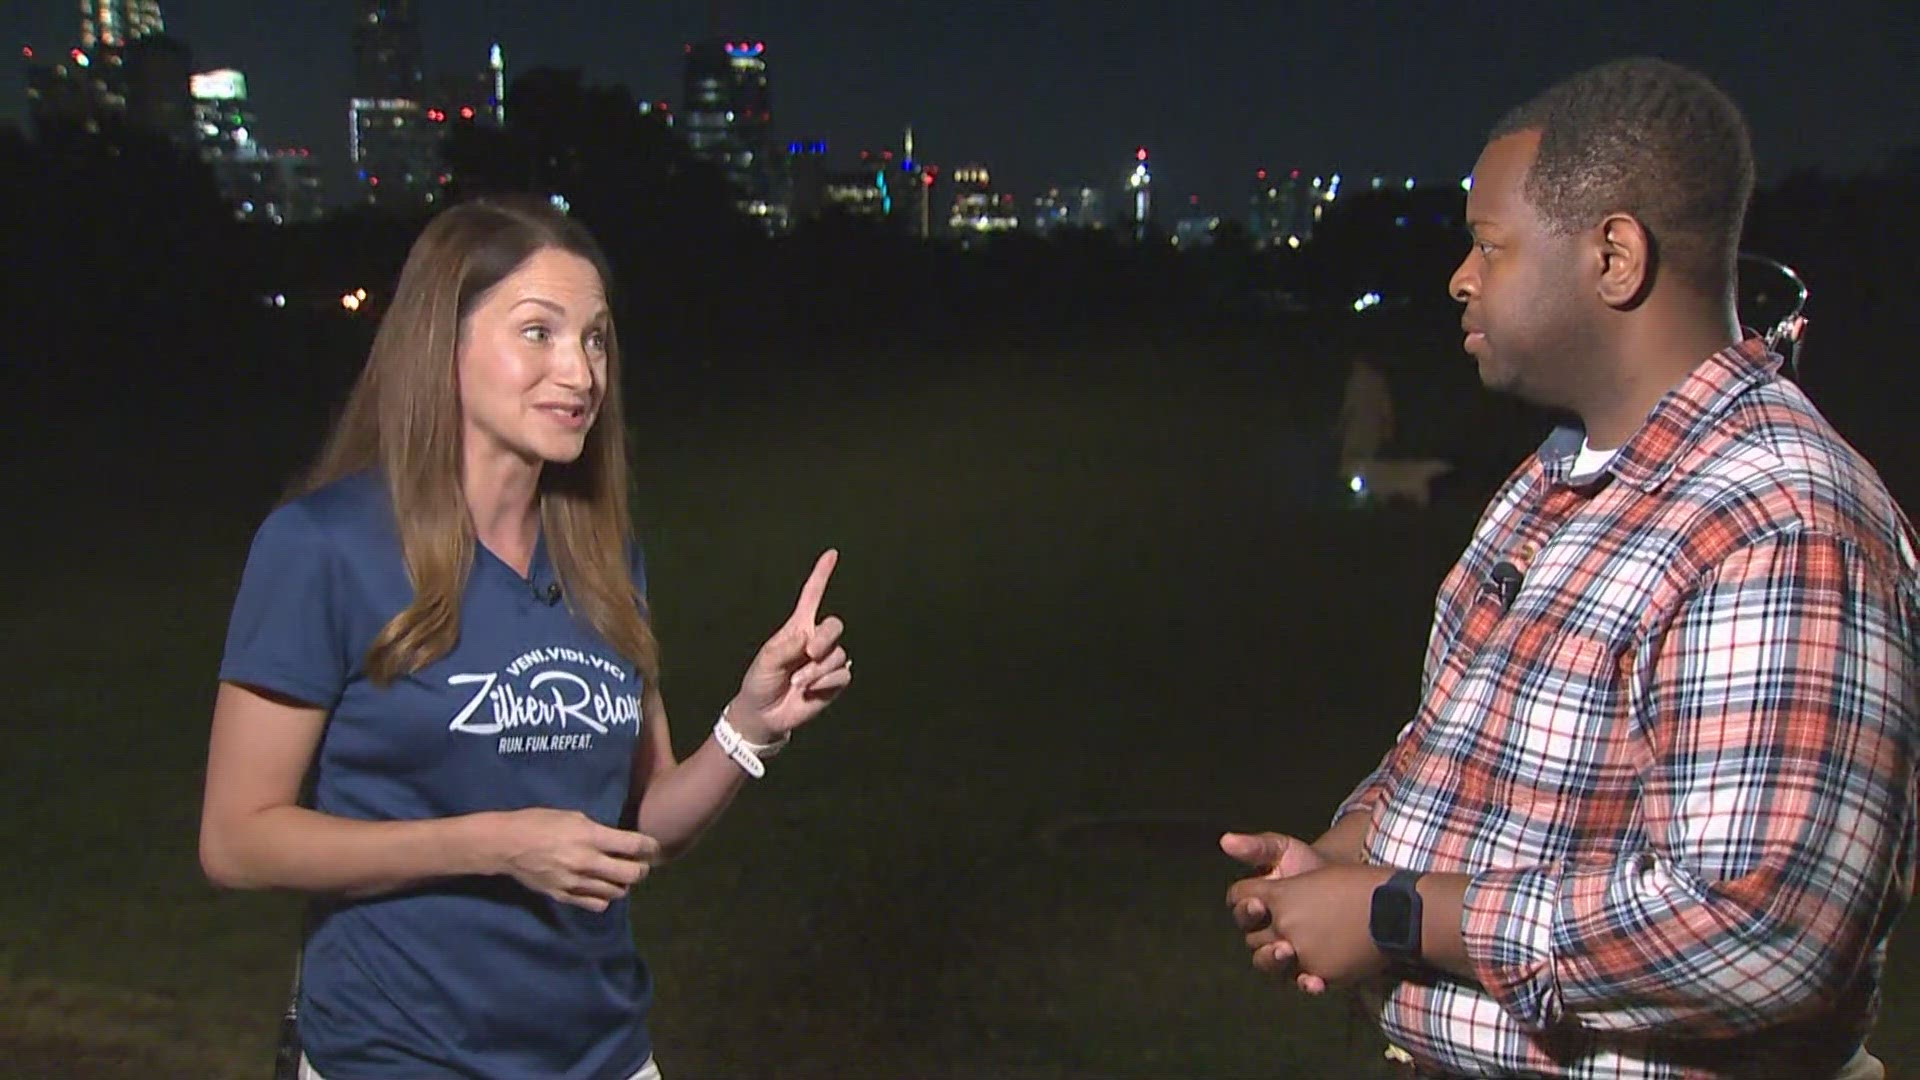 The 2023 Zilker Relays are scheduled for Friday, Sept. 8. KVUE's Eric Pointer spoke with Wendy Wheless, CEO of Marathon Kids, about the race.